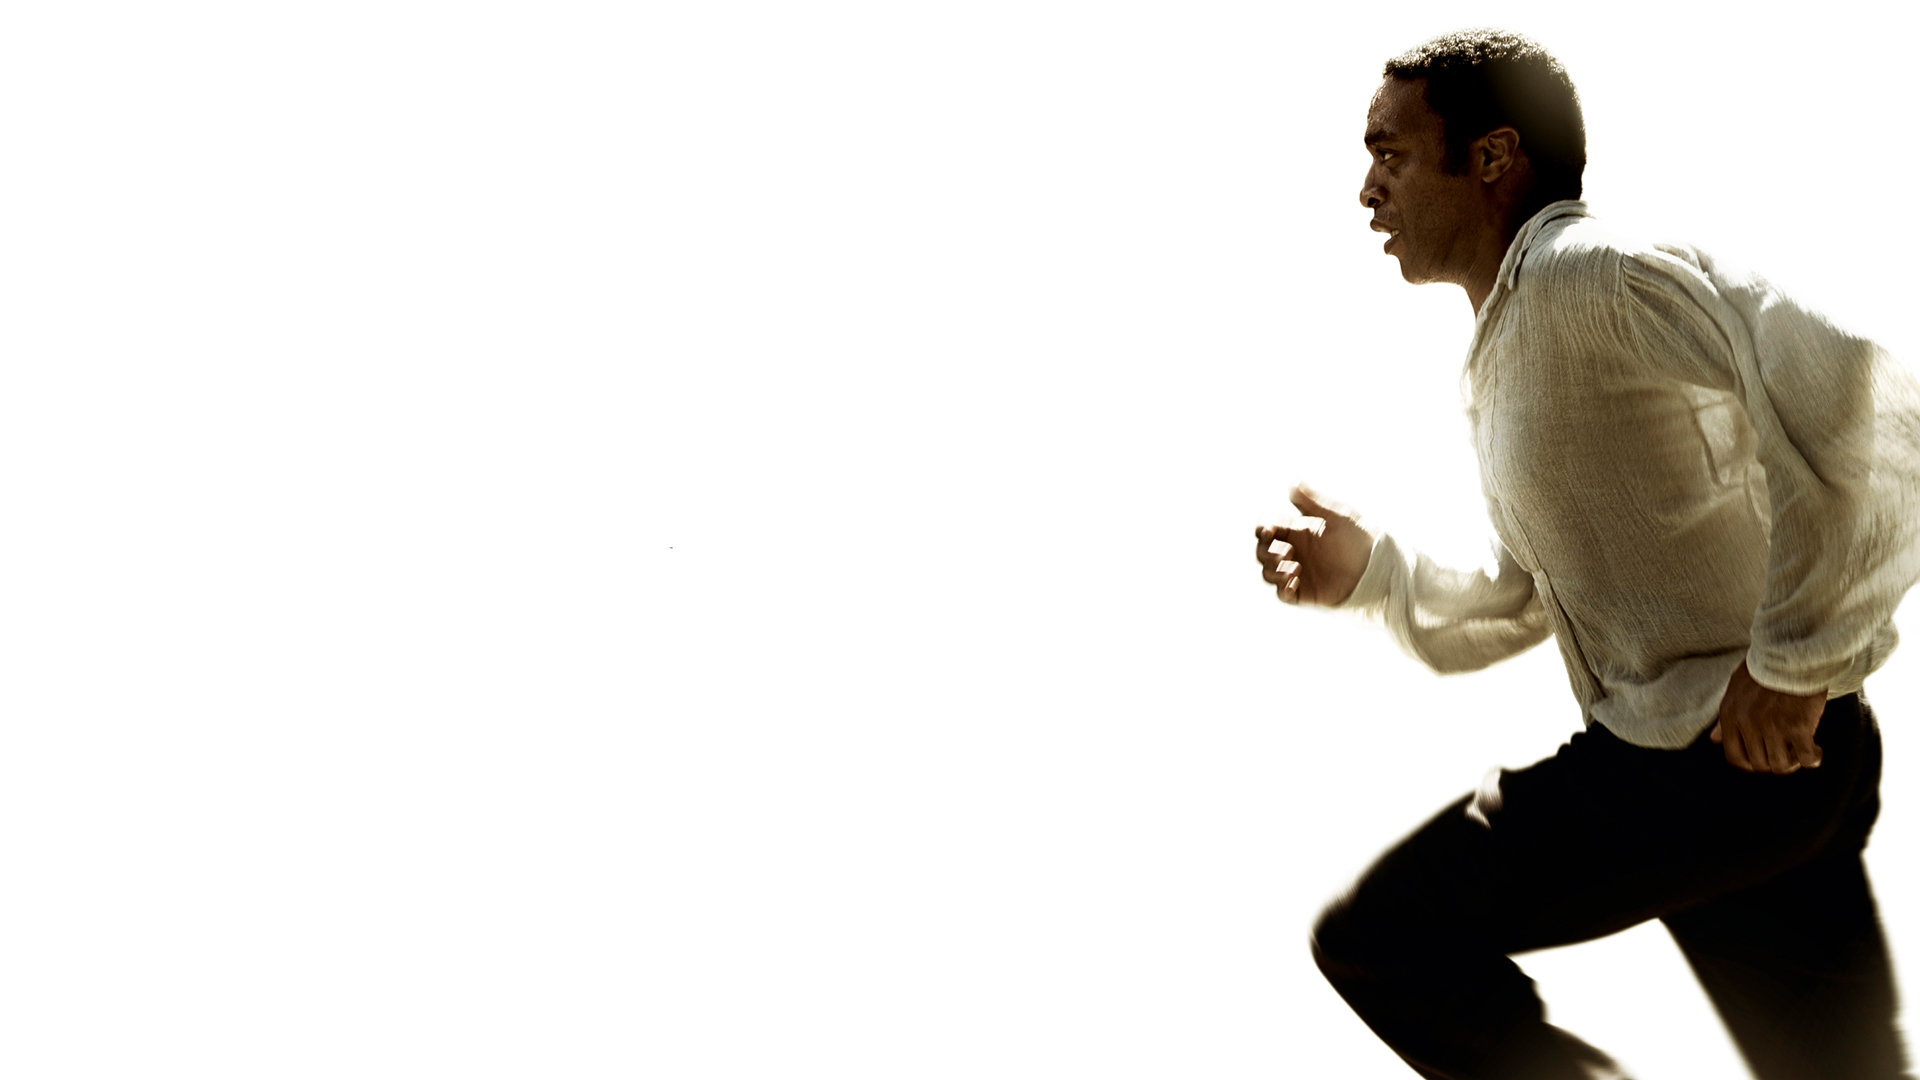 Best 12 Years A Slave wallpaper ID:234830 for High Resolution hd 1920x1080 computer